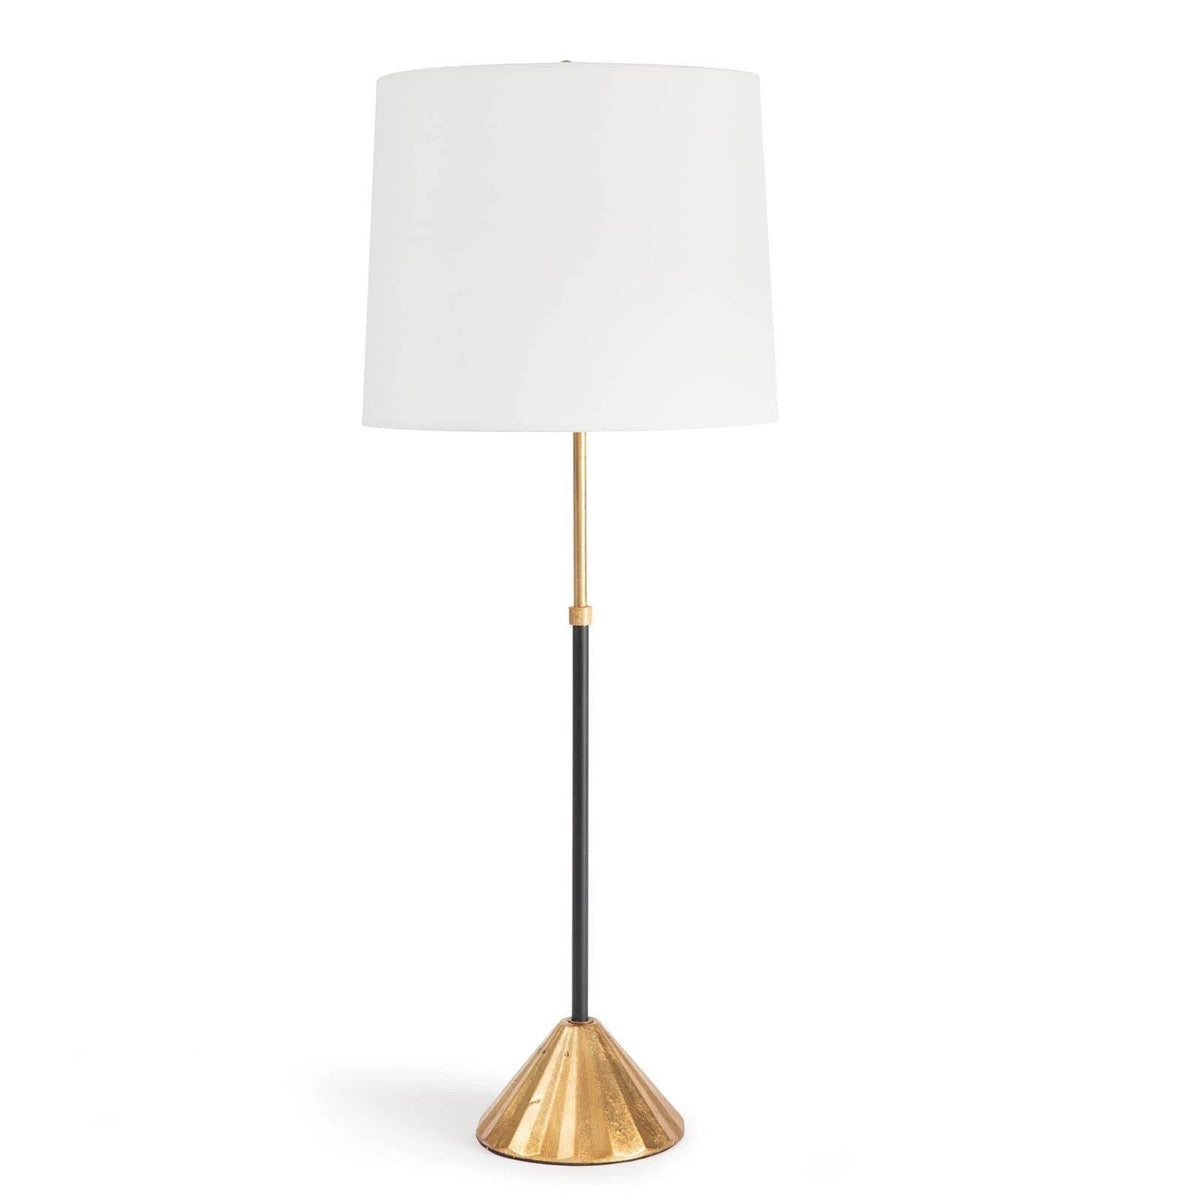 Parasol Table Lamp. Front view.